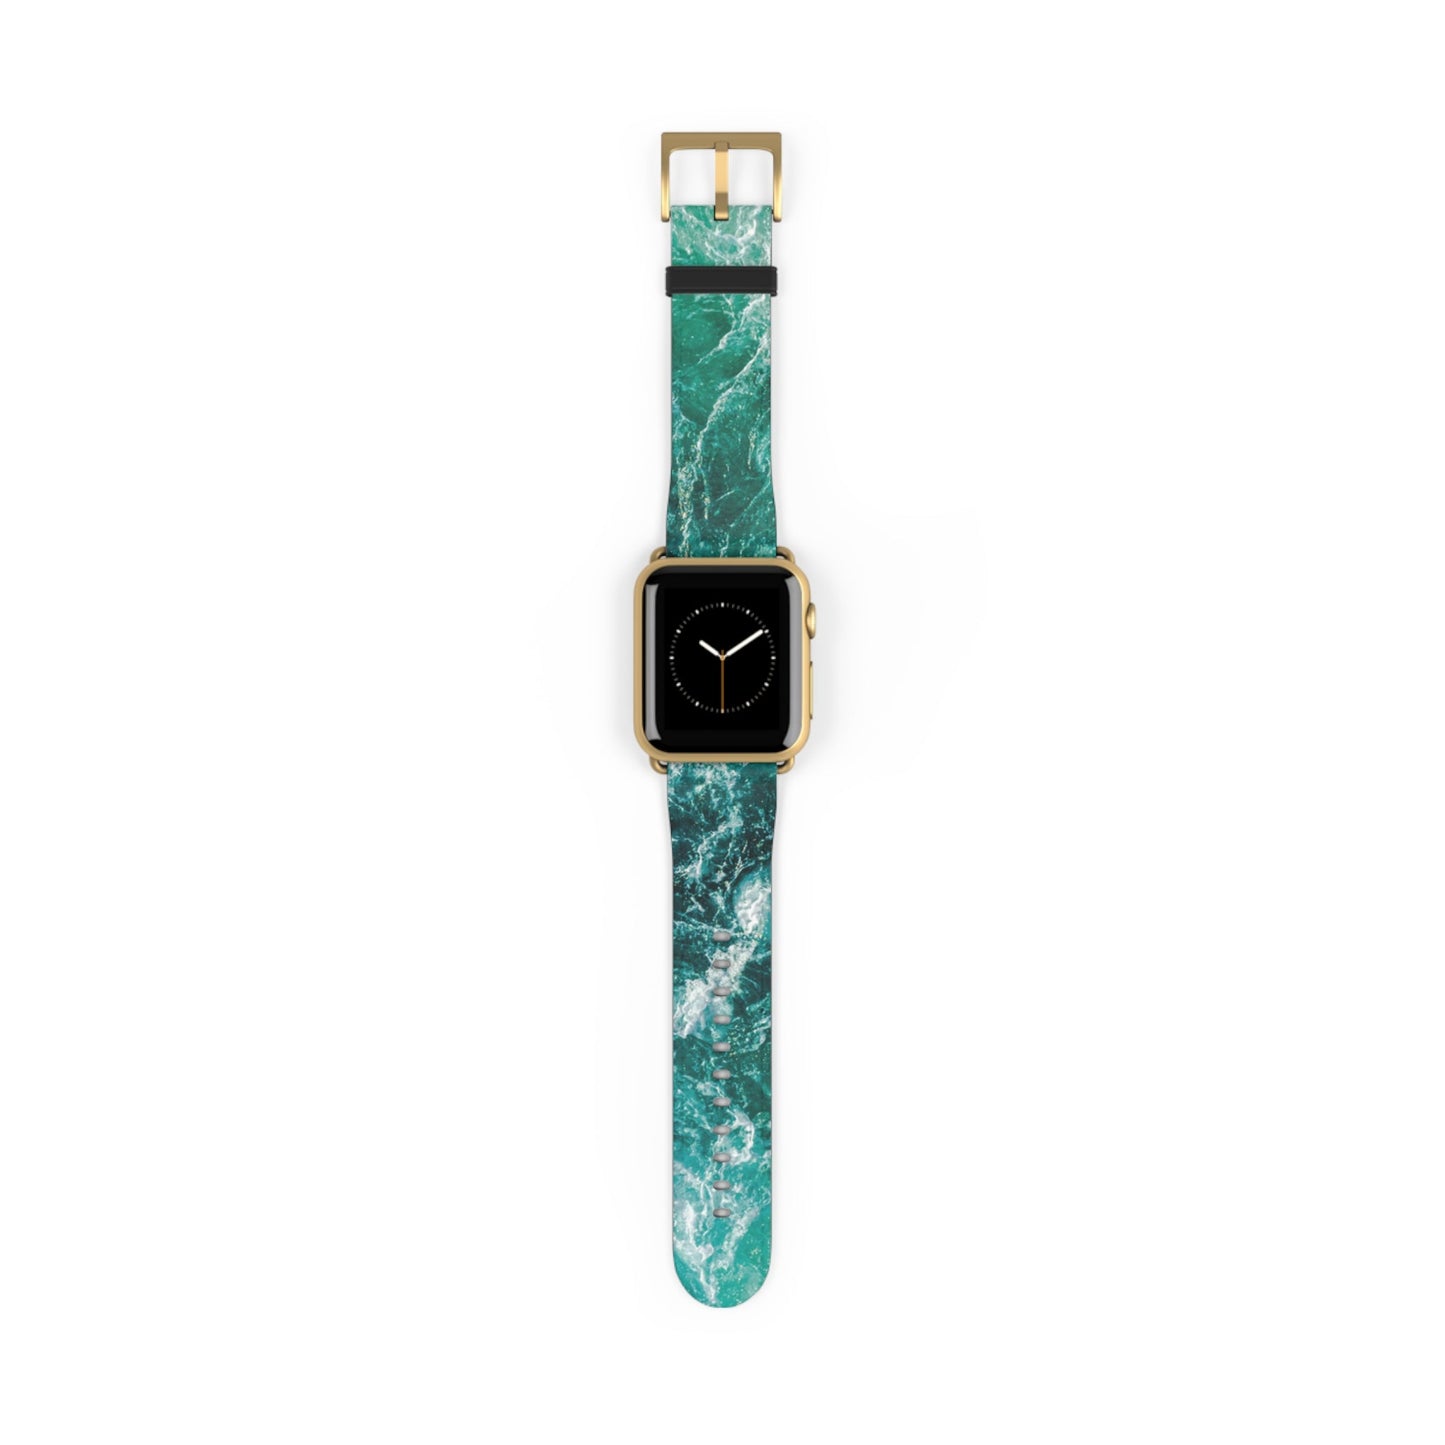 Accessories - Water Stream Gushy River Watch Band